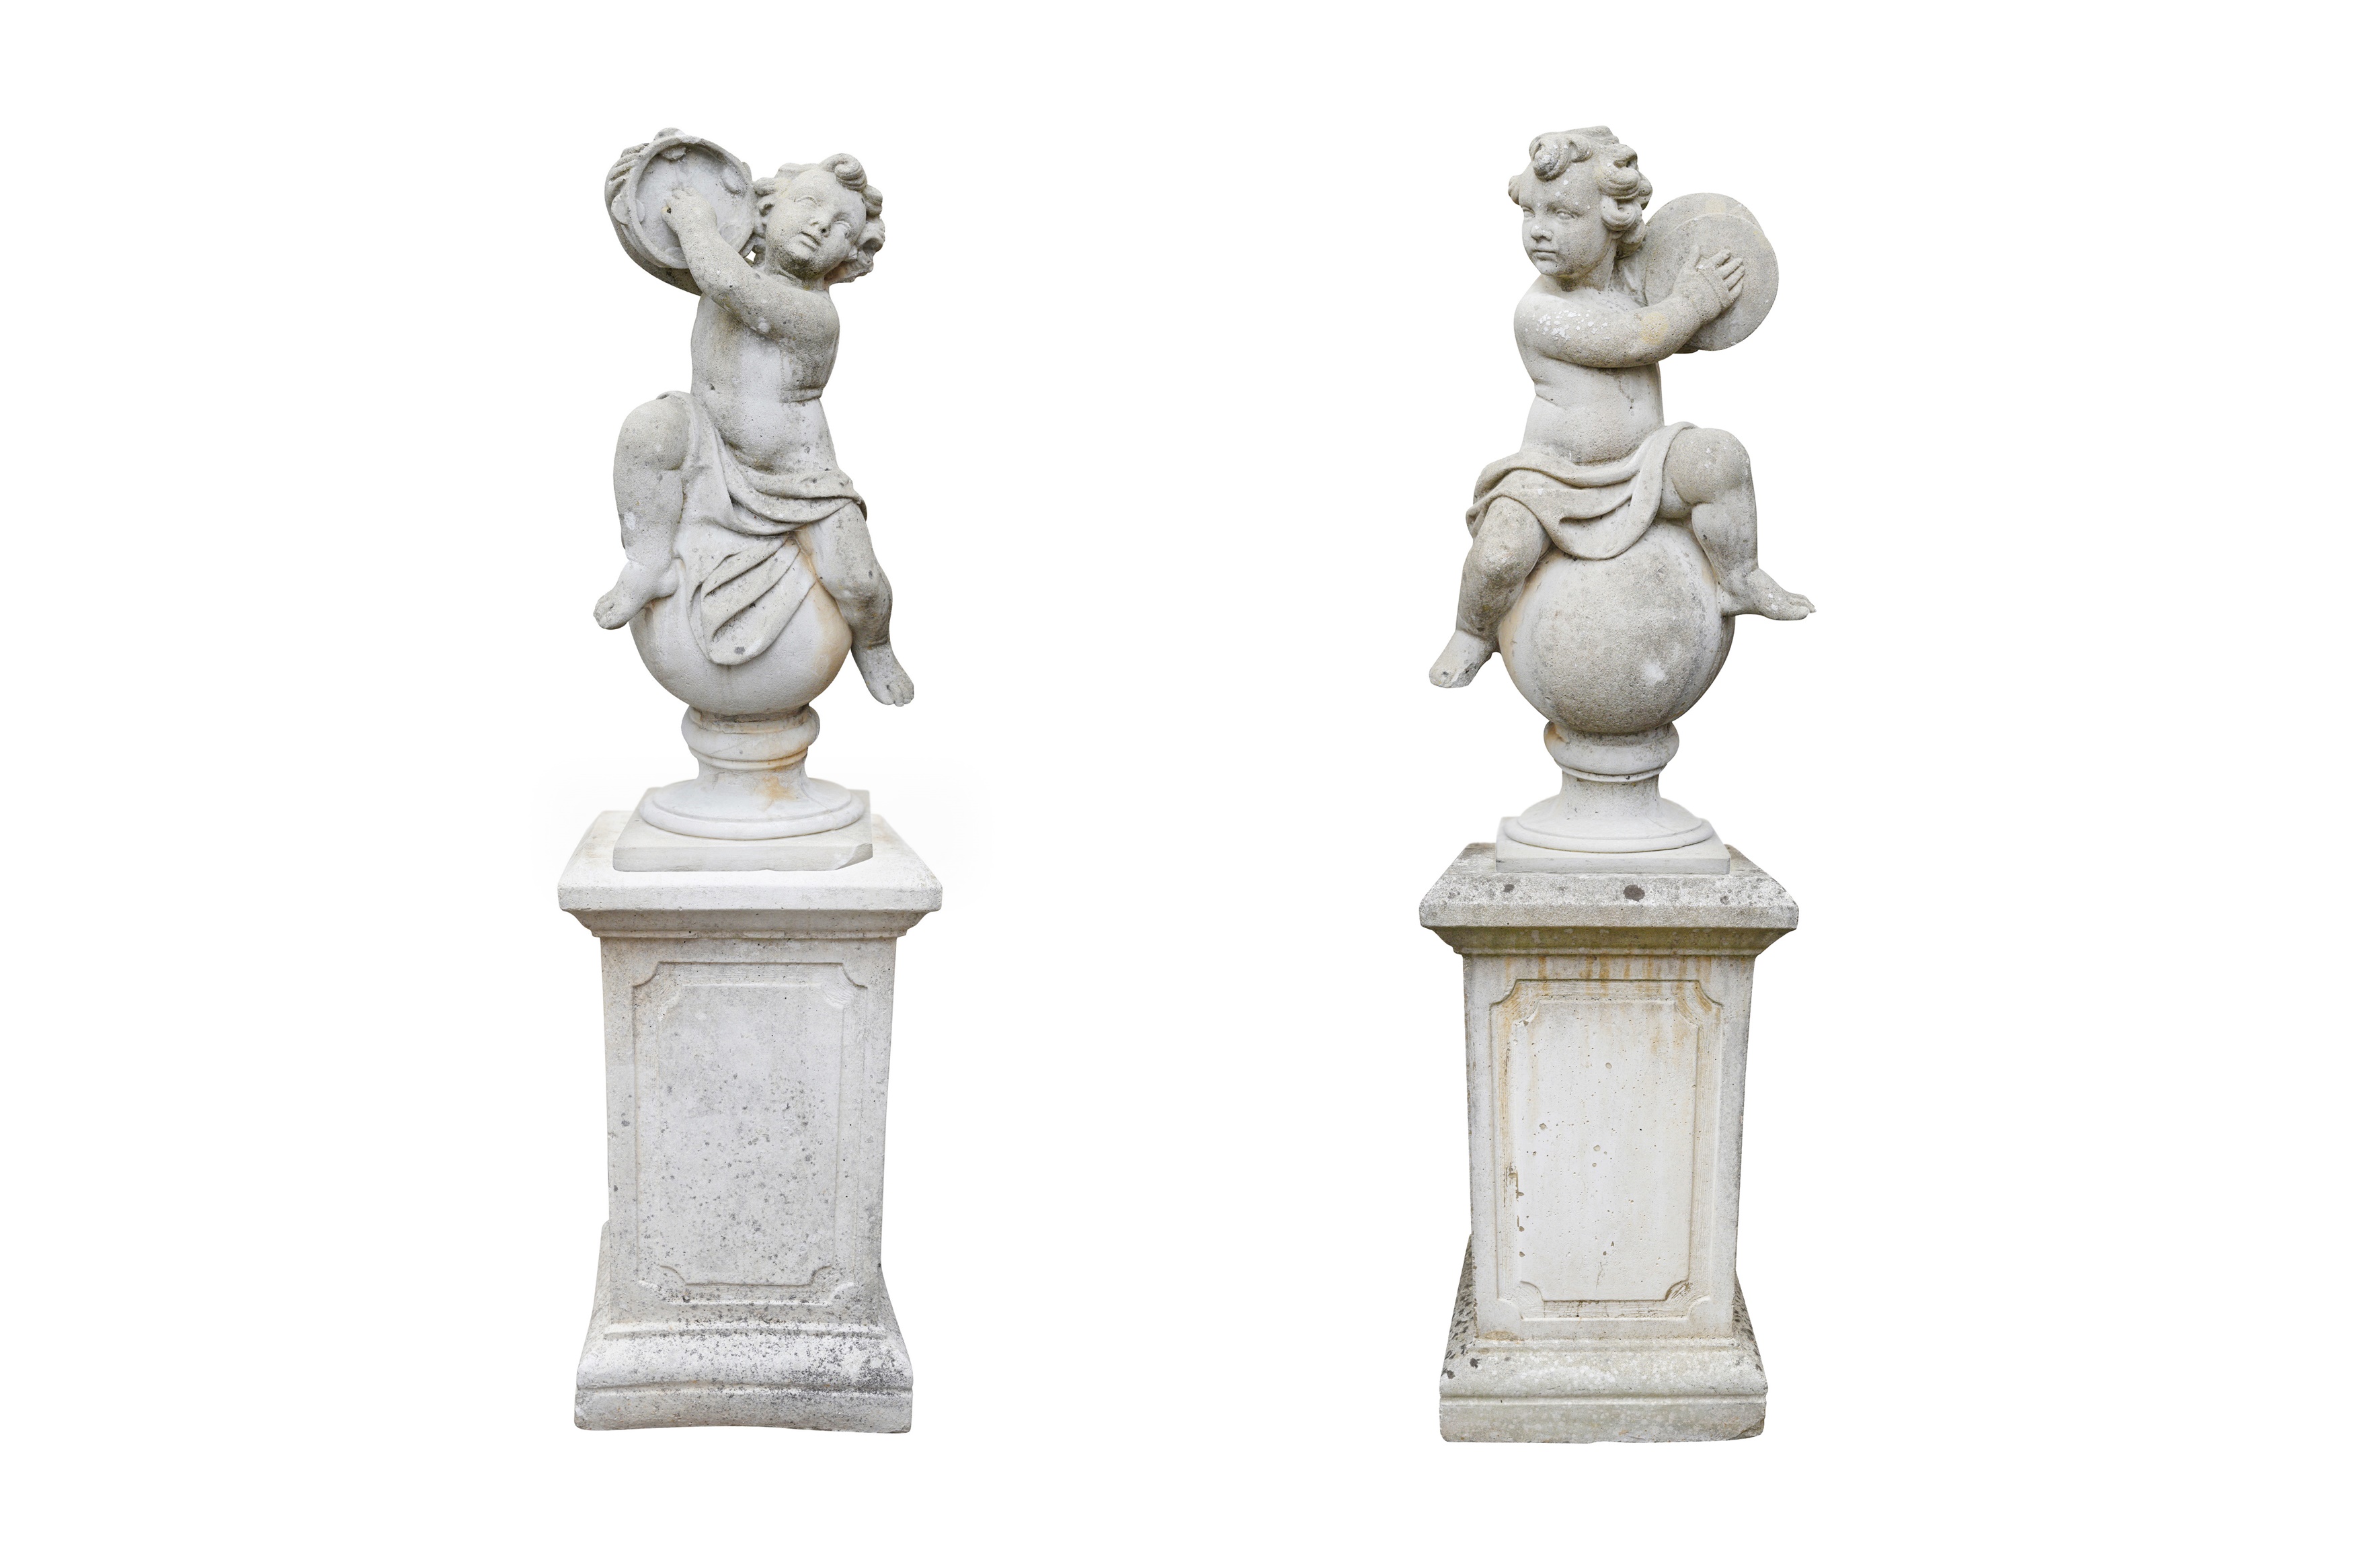 A PAIR OF COMPOSITION STONE MUSICAL PUTTI